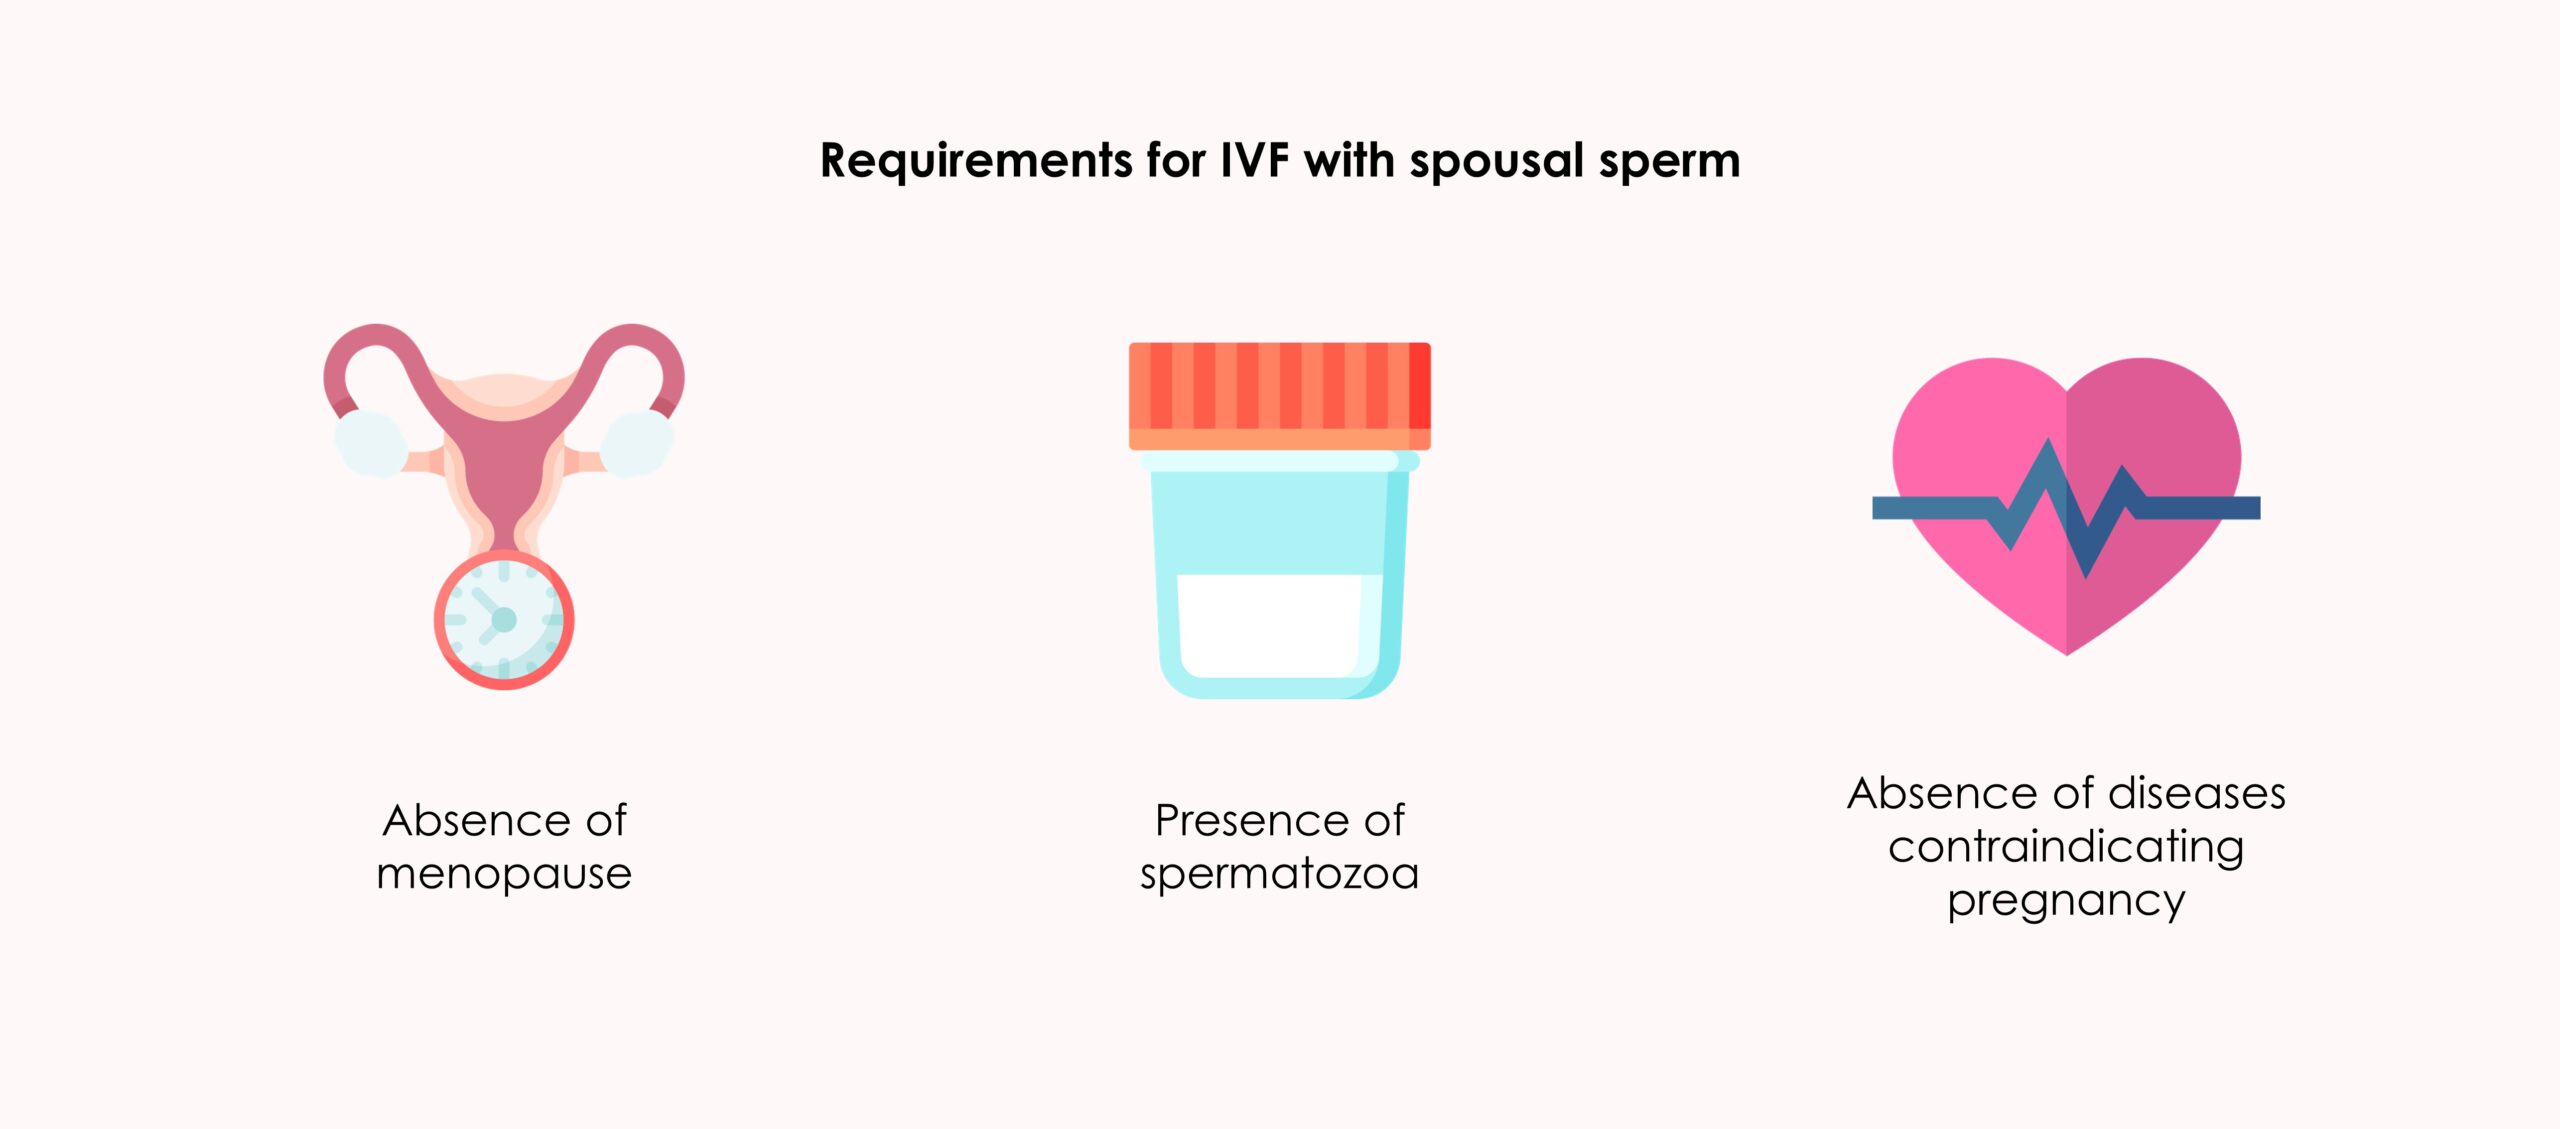 What is the step-by-step process of IVF with conjugal sperm?